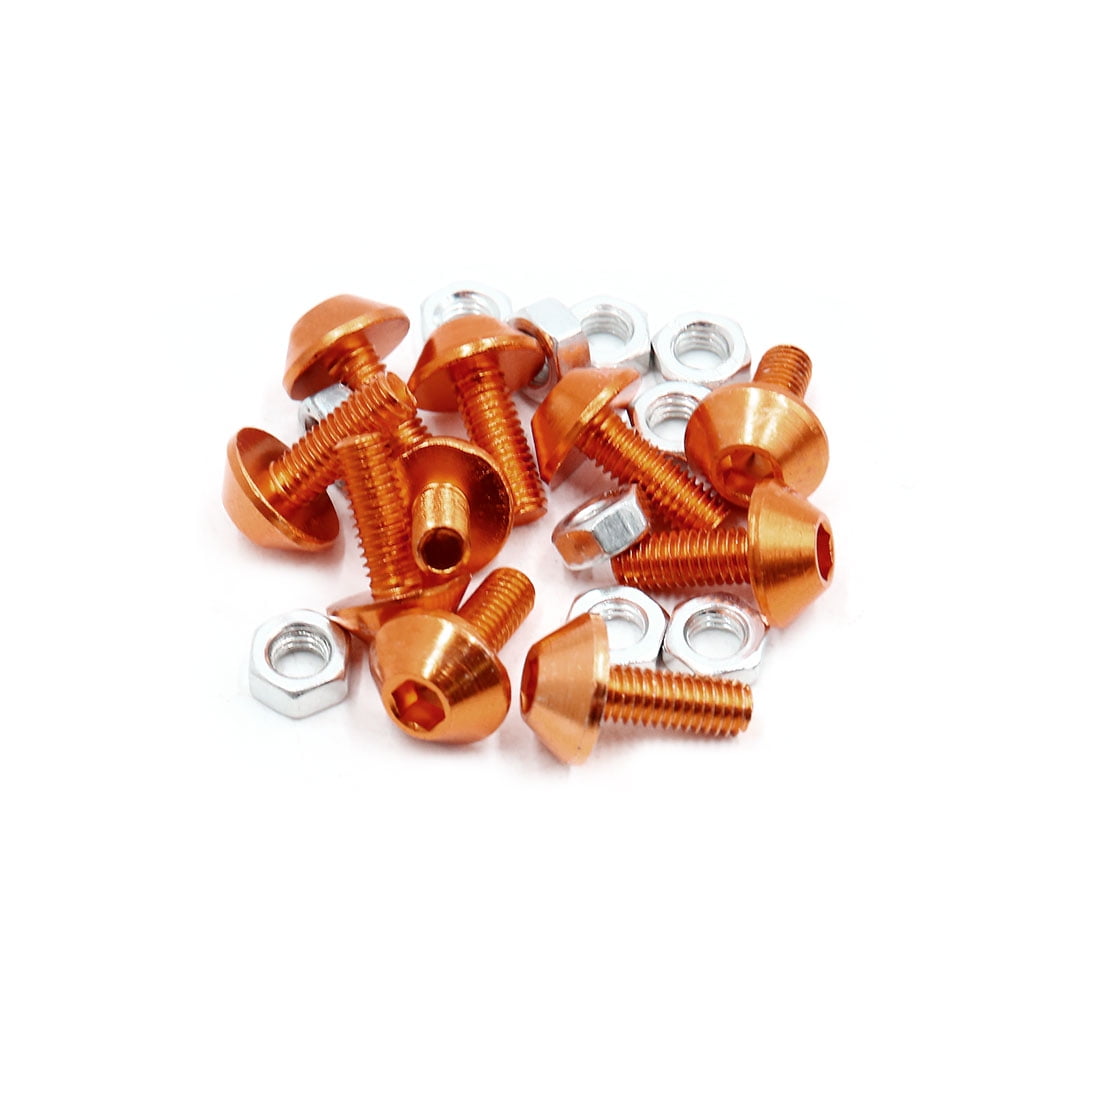 uxcell 10 Pcs 30 X 15mm Round License Plate Bolt Screw Orange for Motorcycle